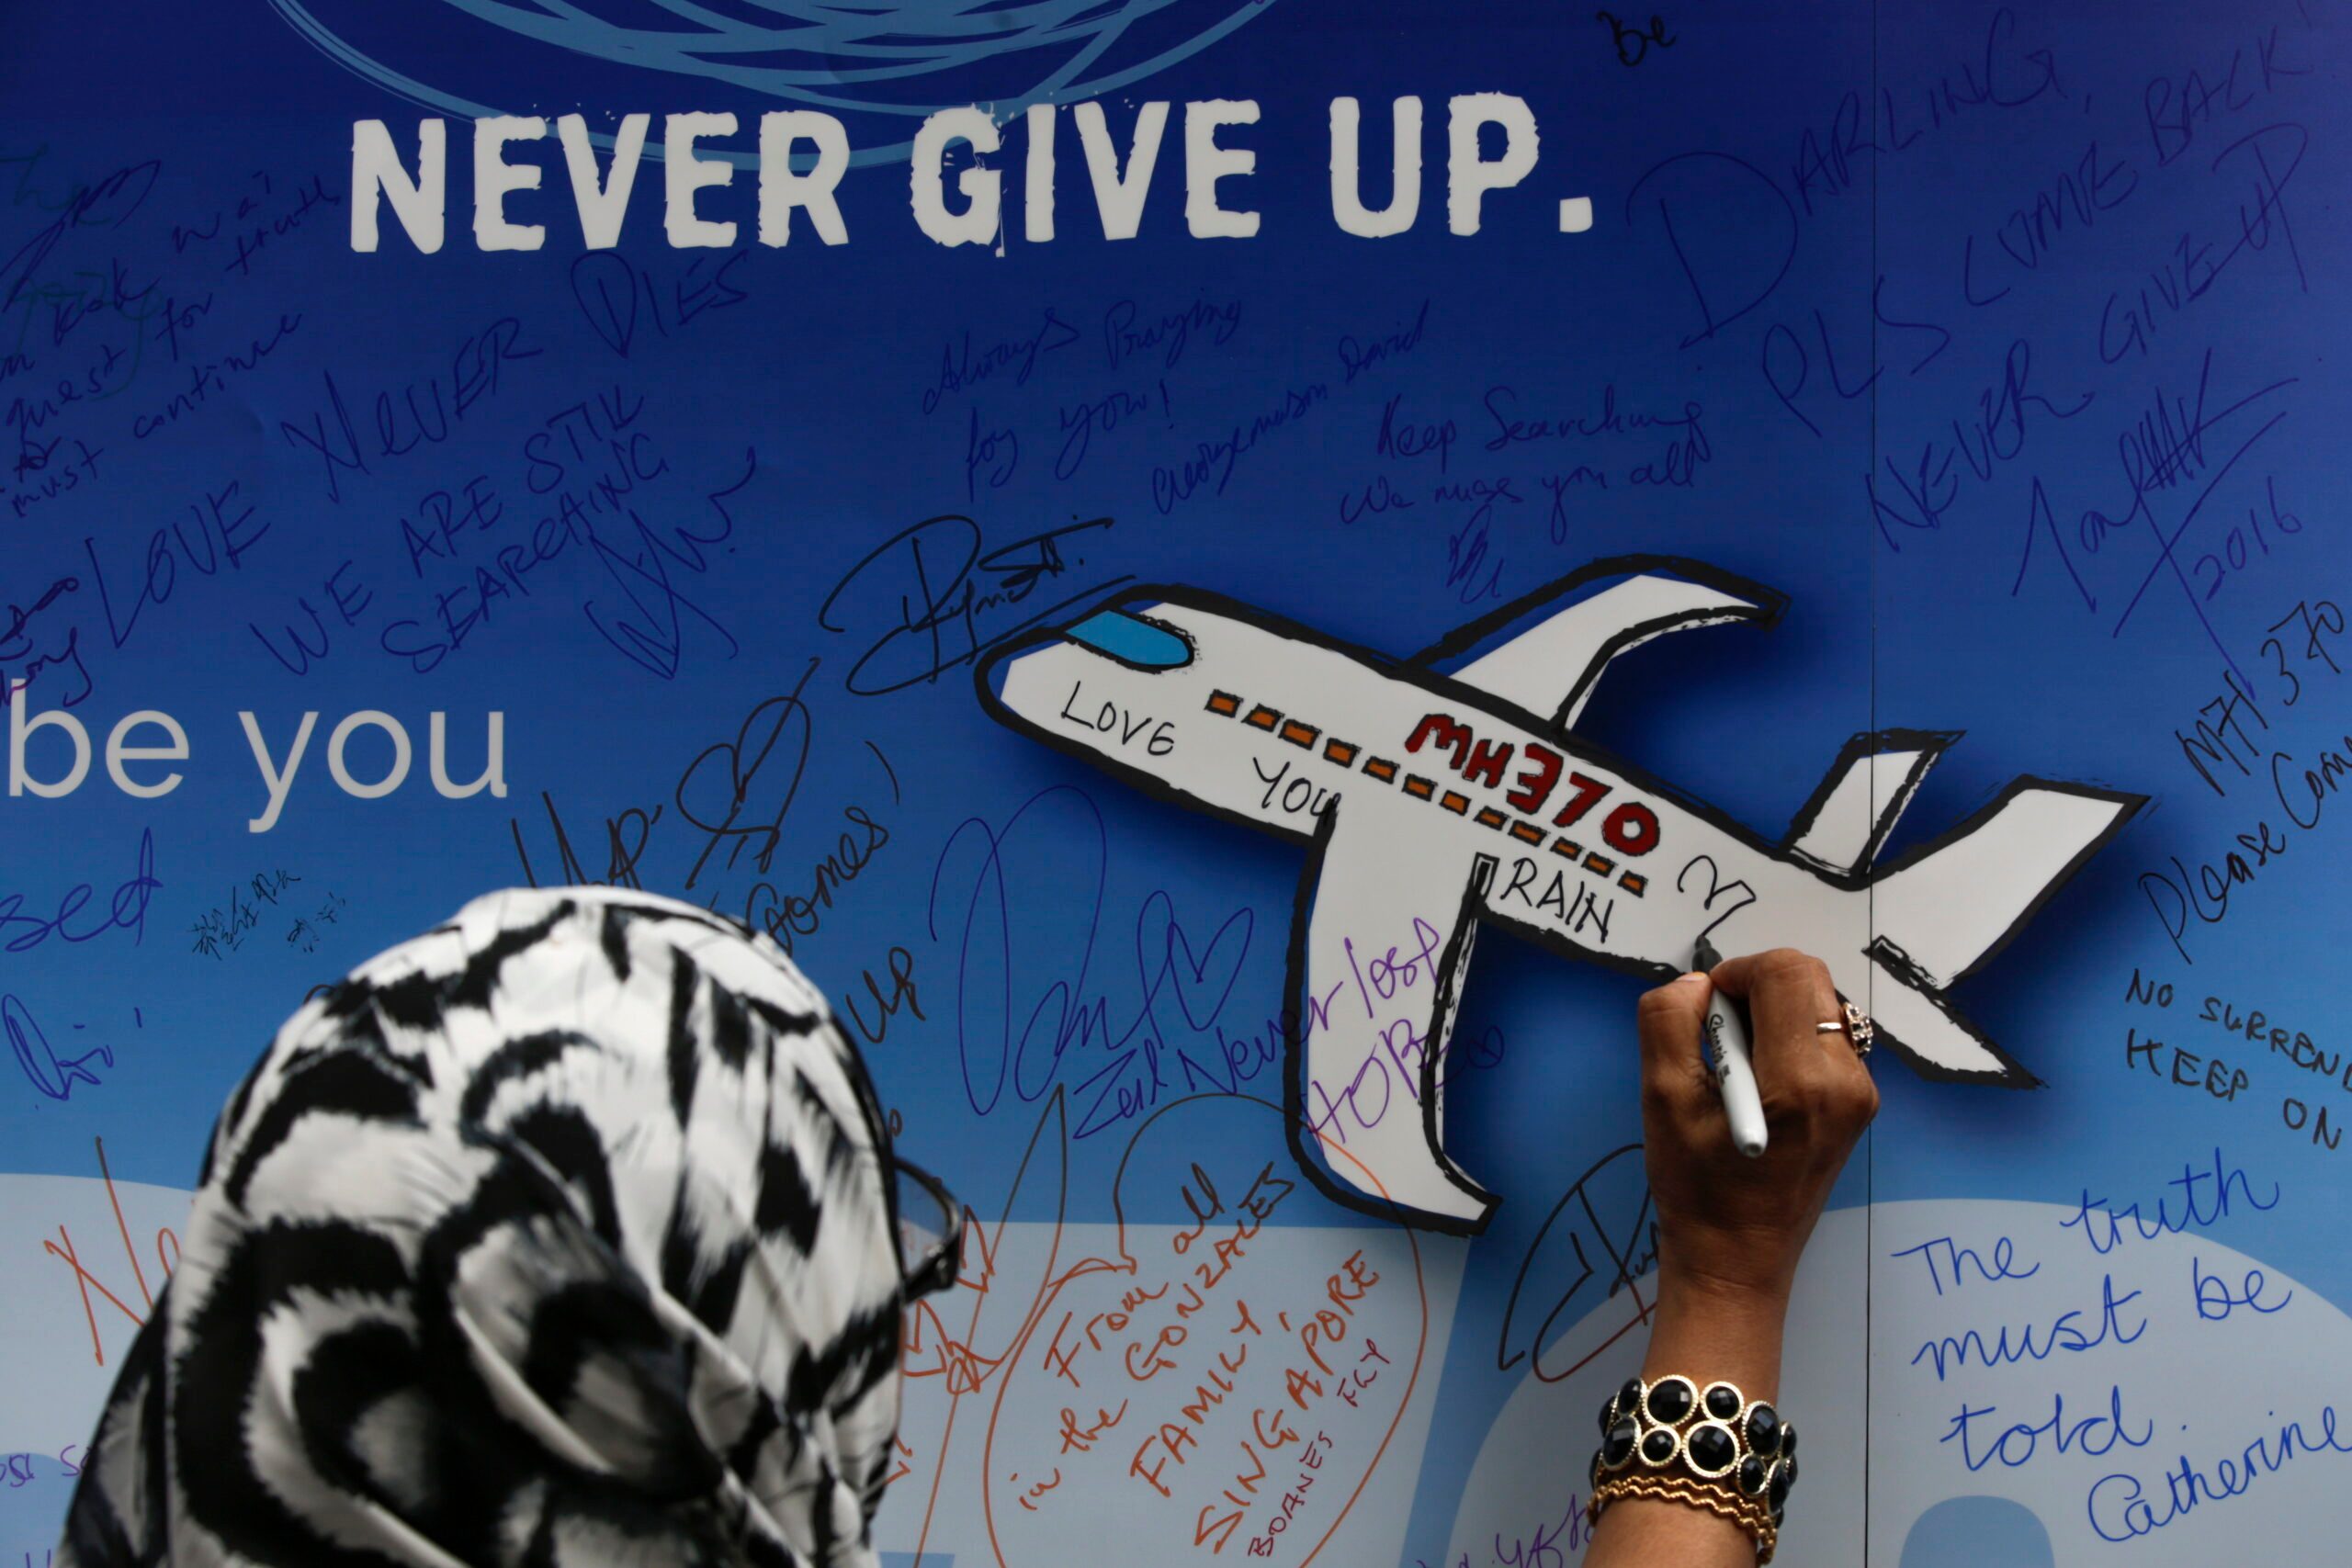 Two years on, MH370 kin want search extended